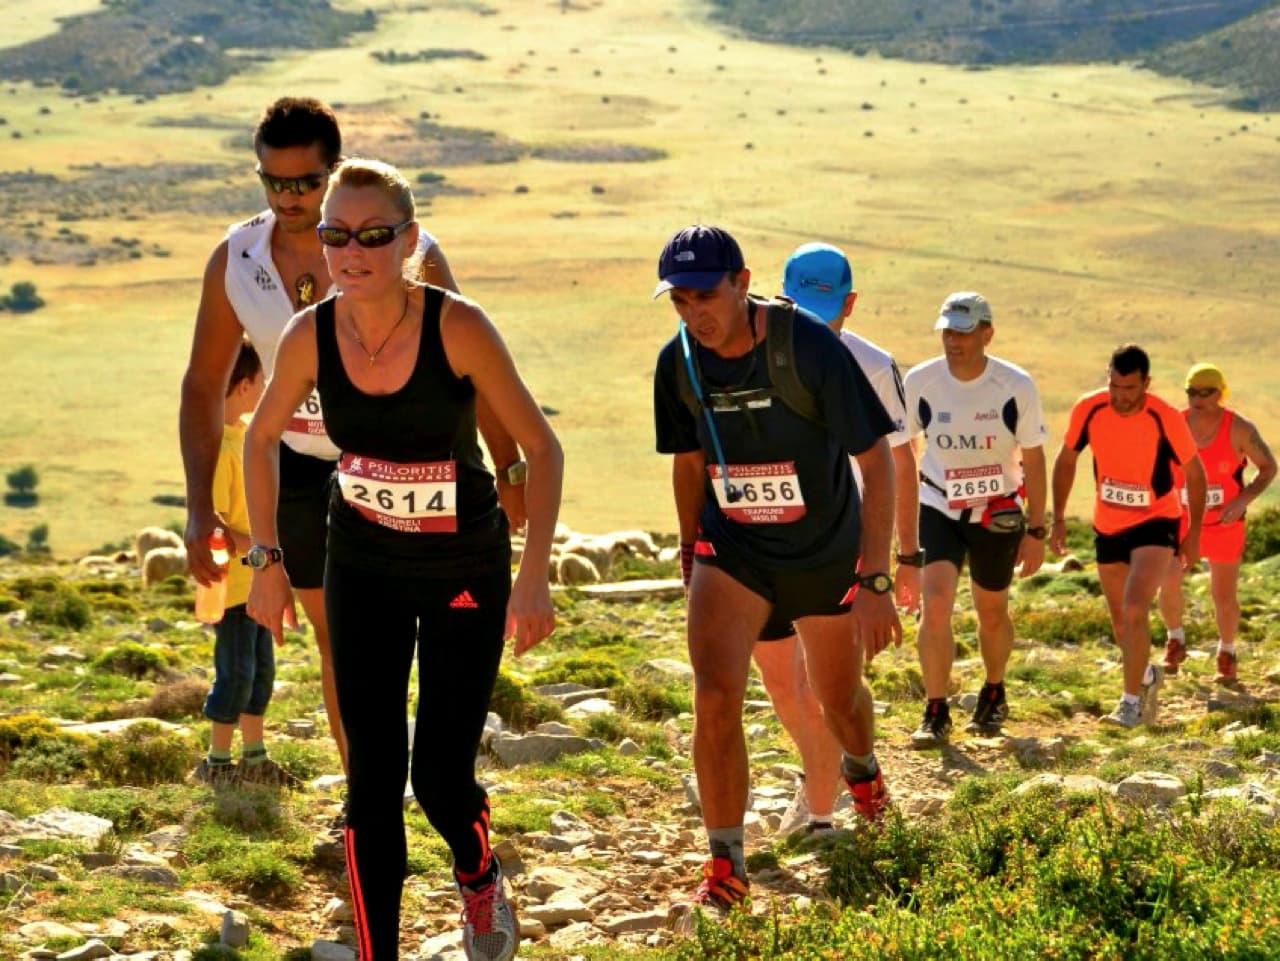 Crete Gears Up for 2017 National Mountain Running Championship